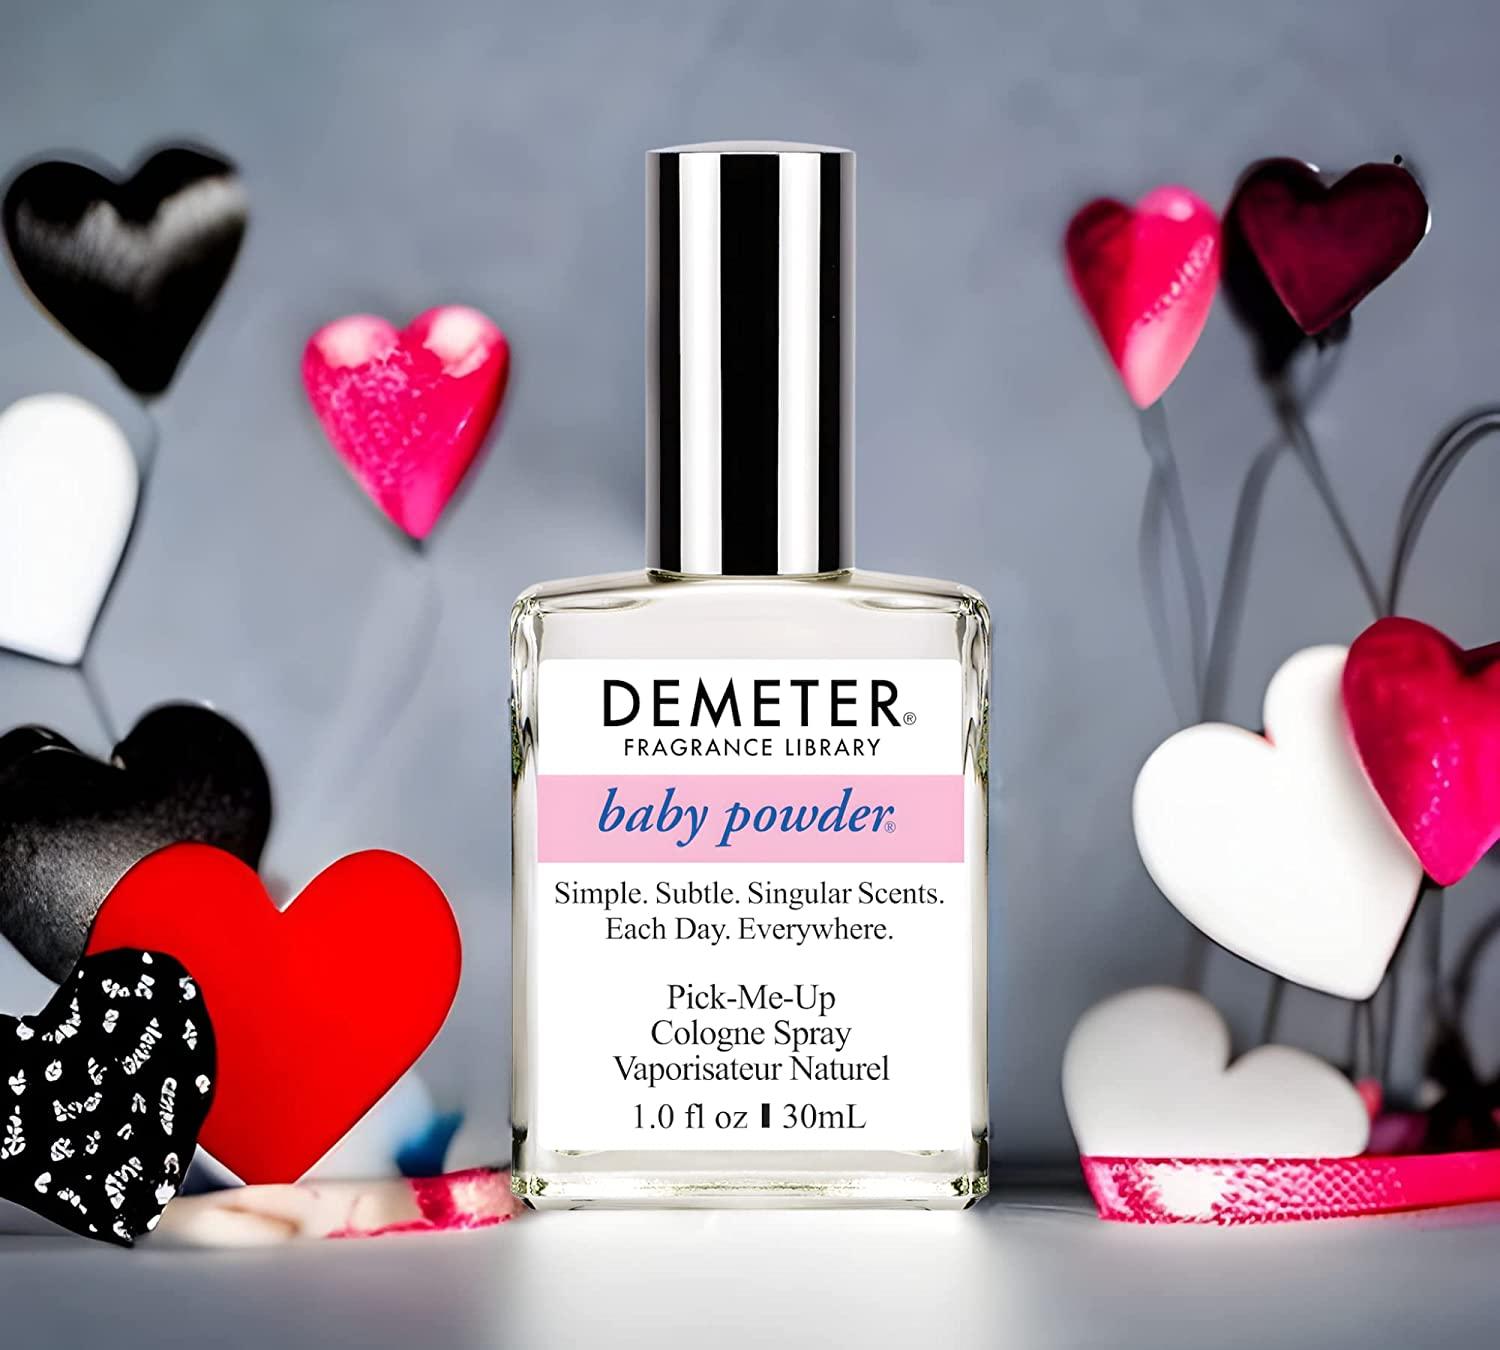 Baby Powder Scented Perfume?! Yup, Let's All Smell As Fresh As Babies!